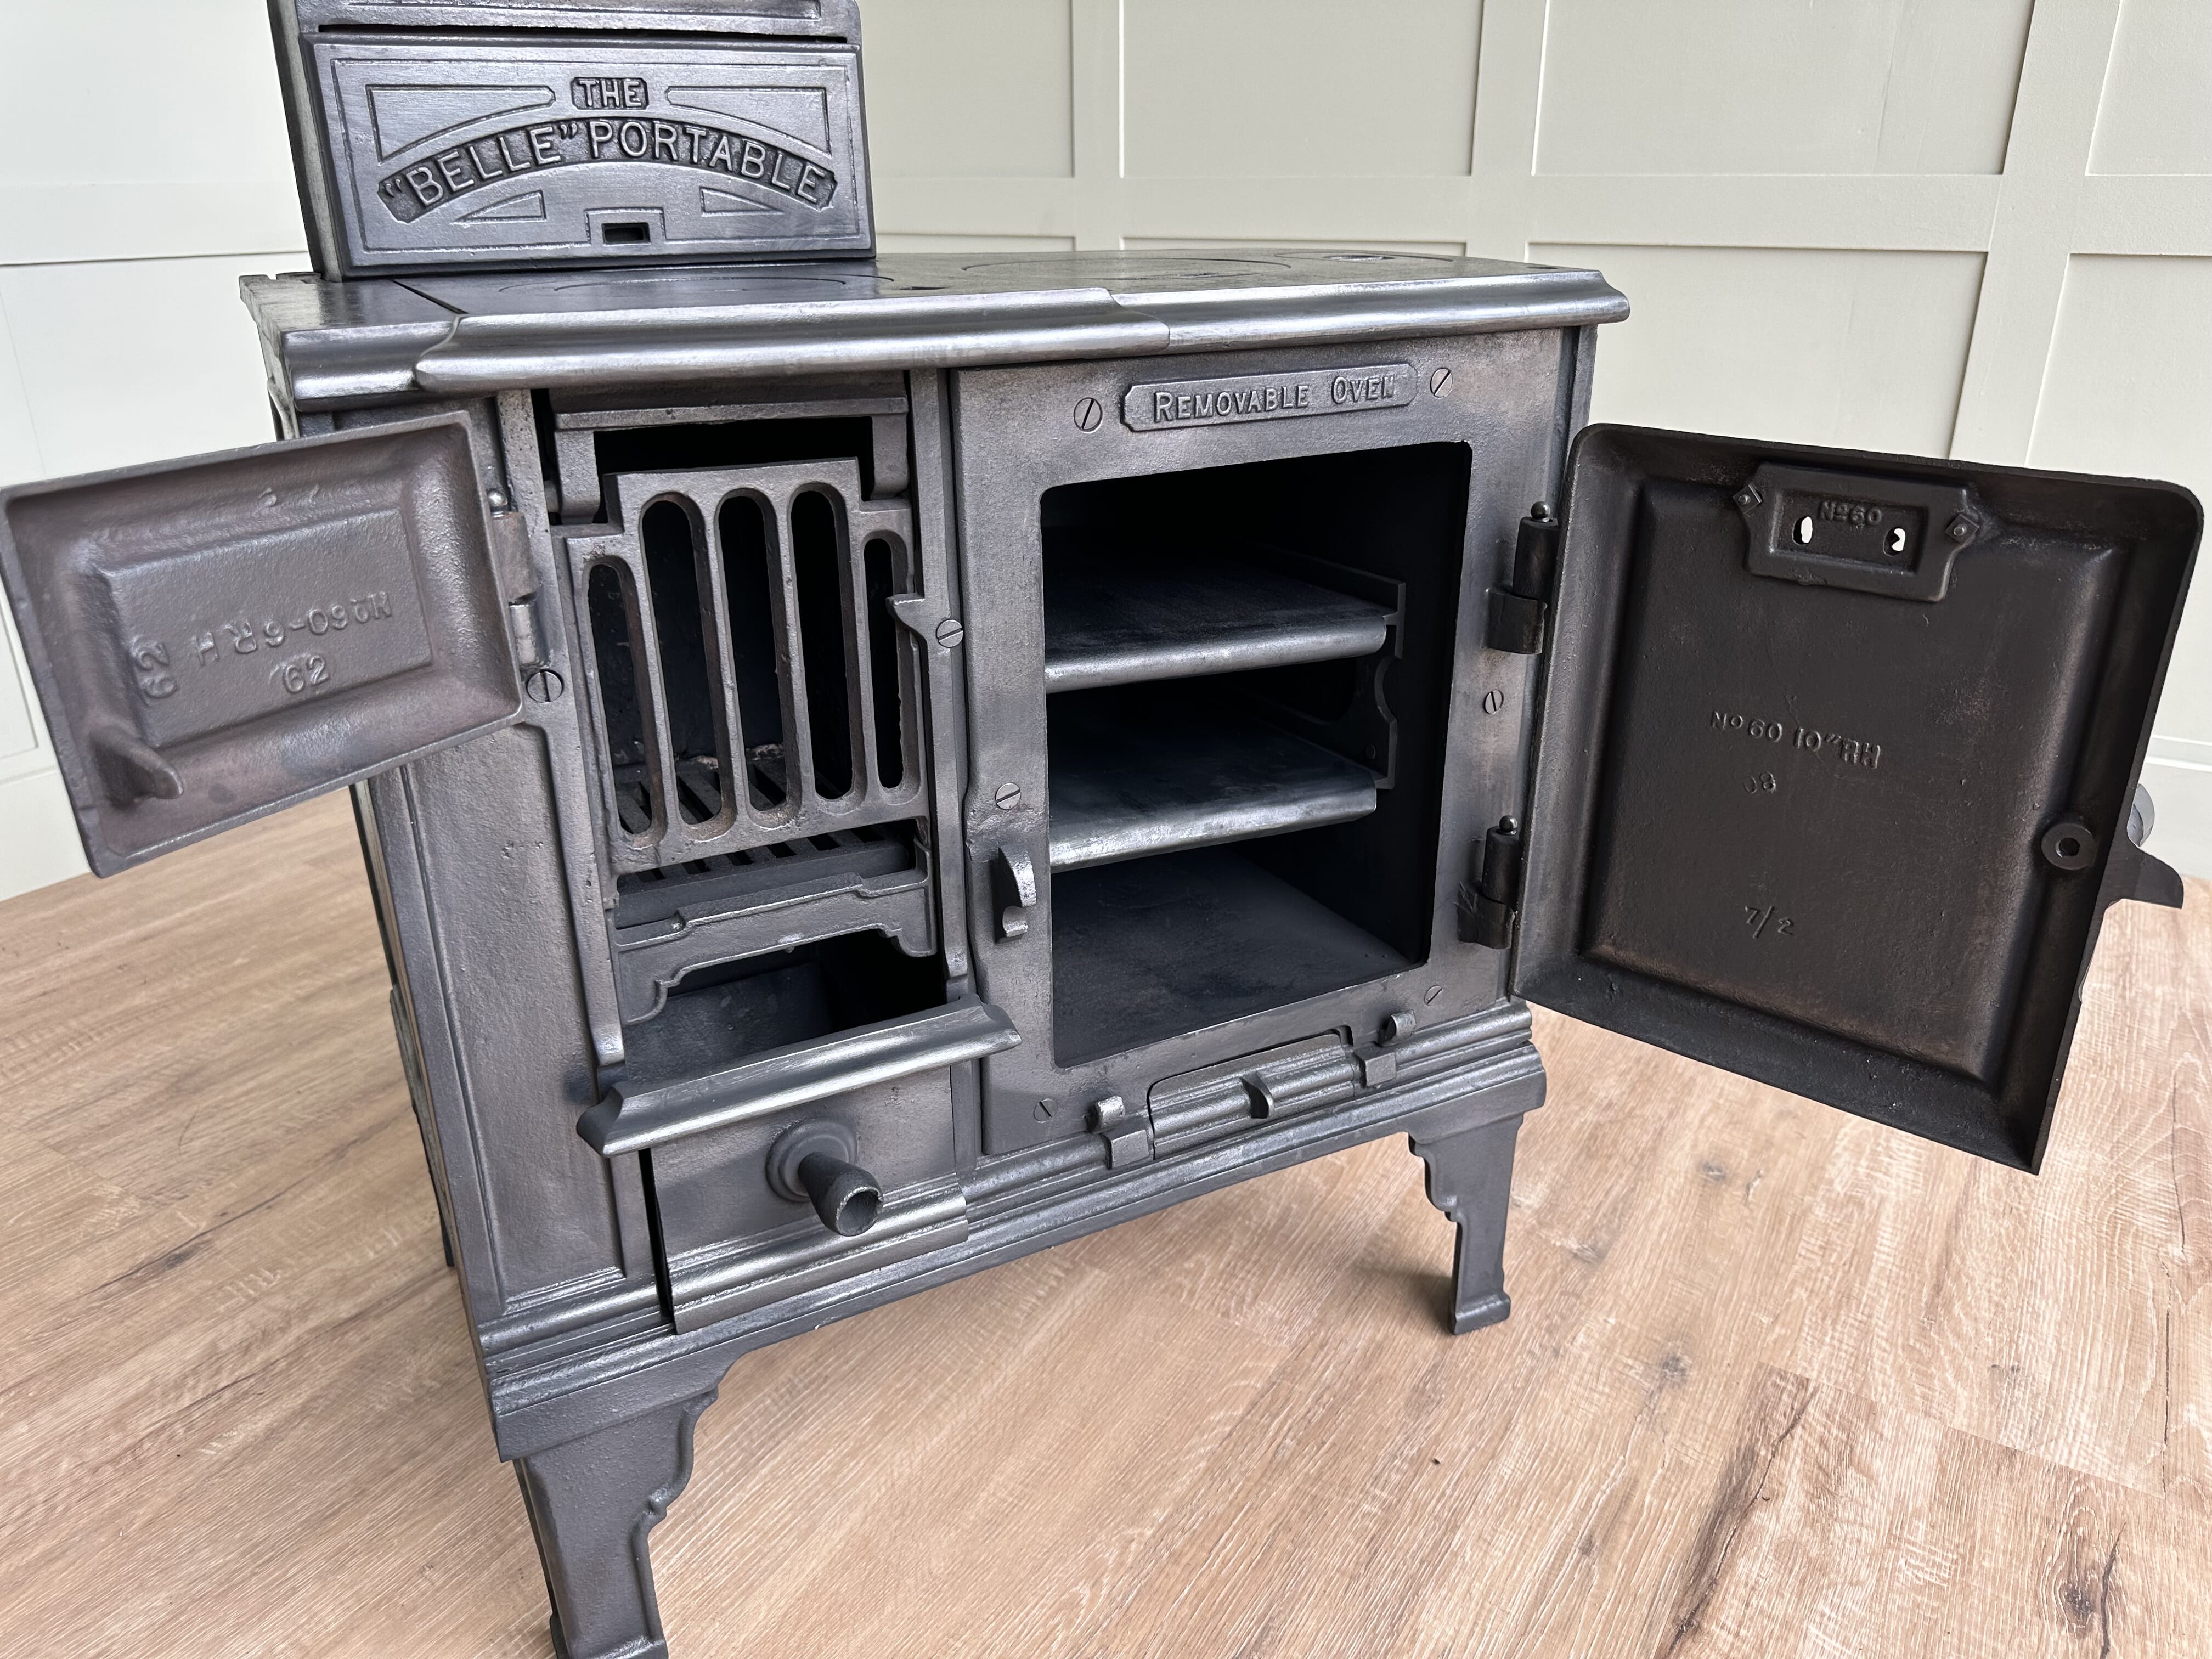 UKAA Have For Sale Antique Kitchen Stoves Made Of Cast Iron